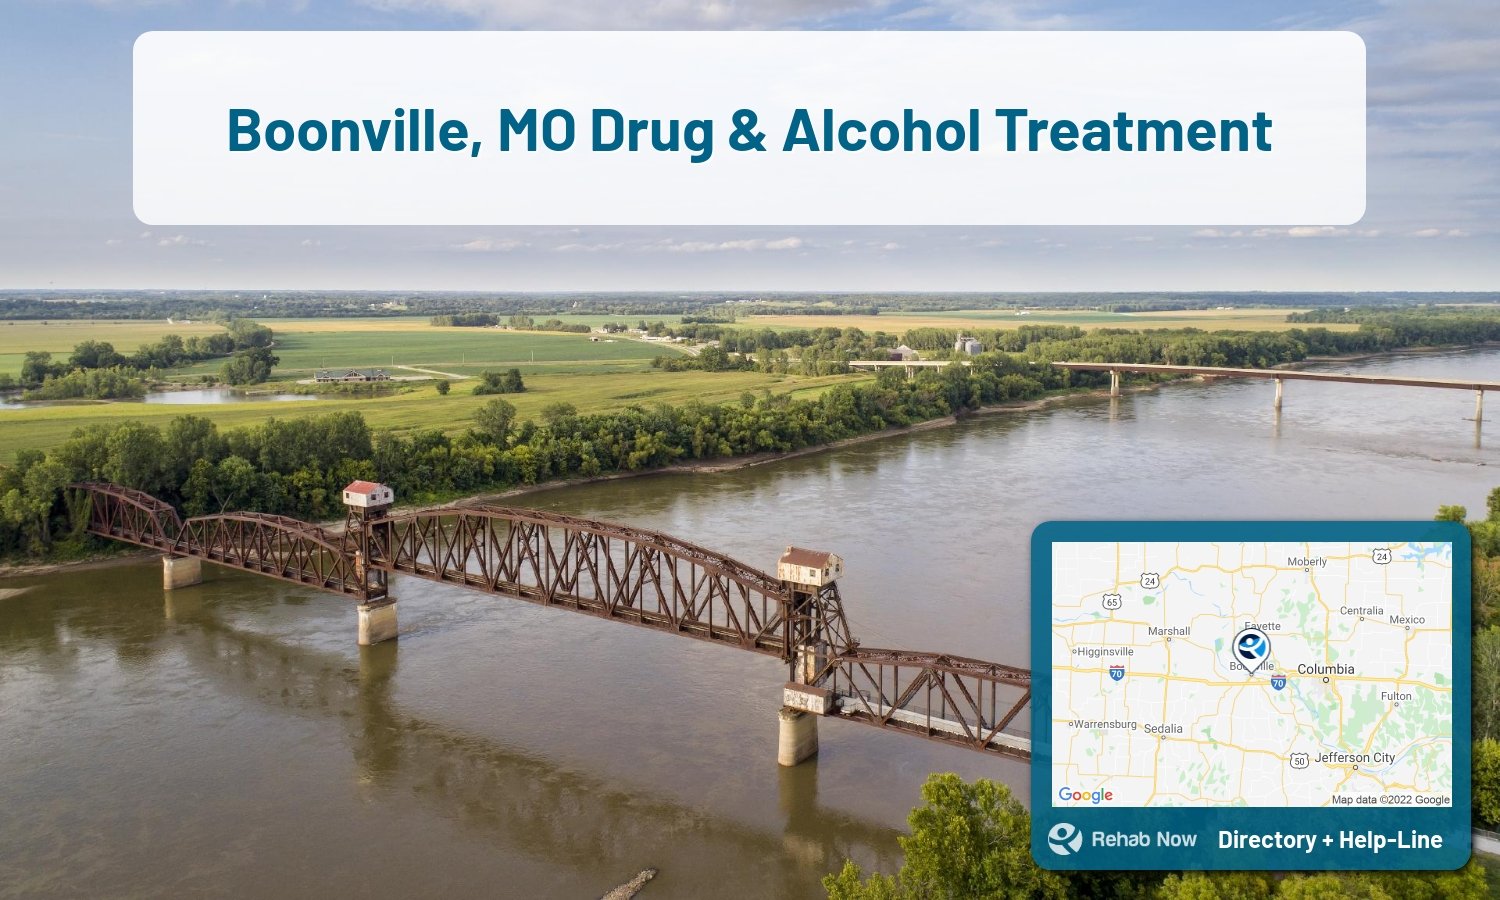 Boonville, MO Treatment Centers. Find drug rehab in Boonville, Missouri, or detox and treatment programs. Get the right help now!